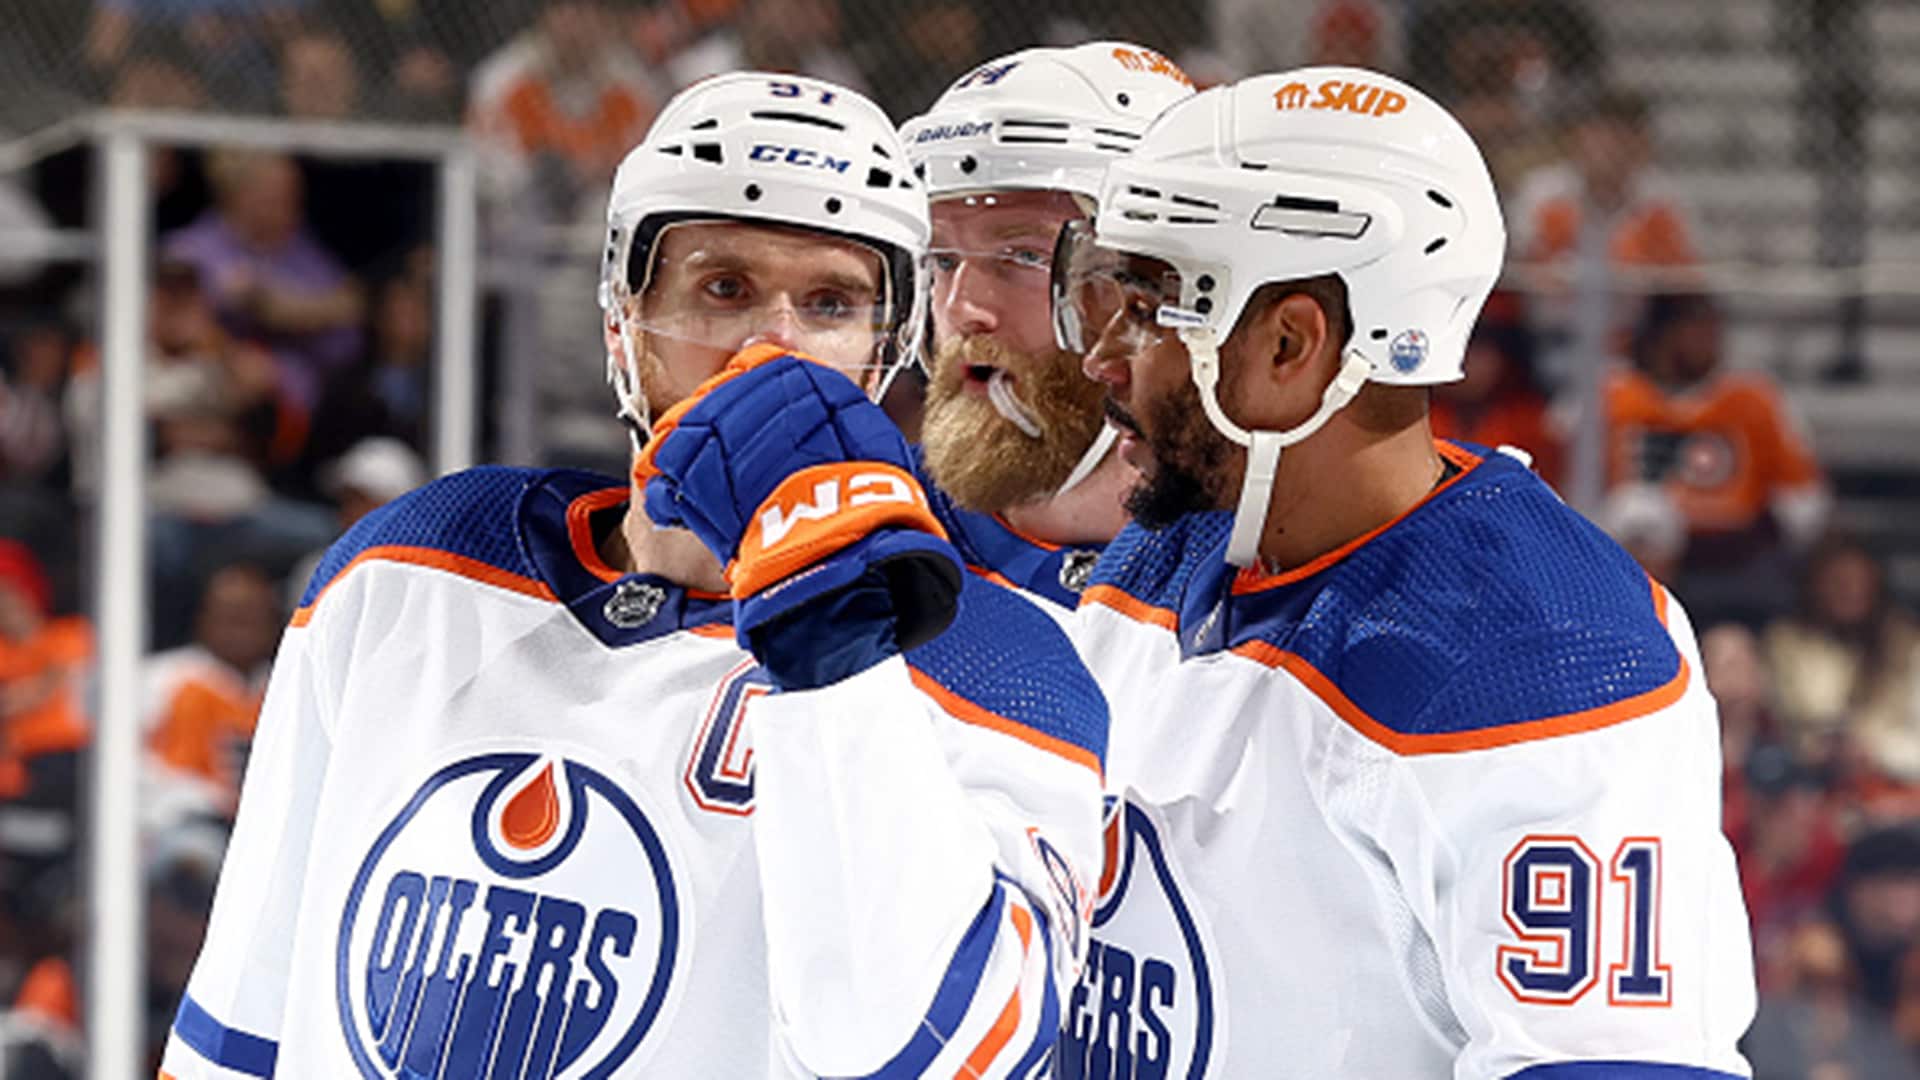 Oilers to face Kings in playoff rematch, Jets will clash with